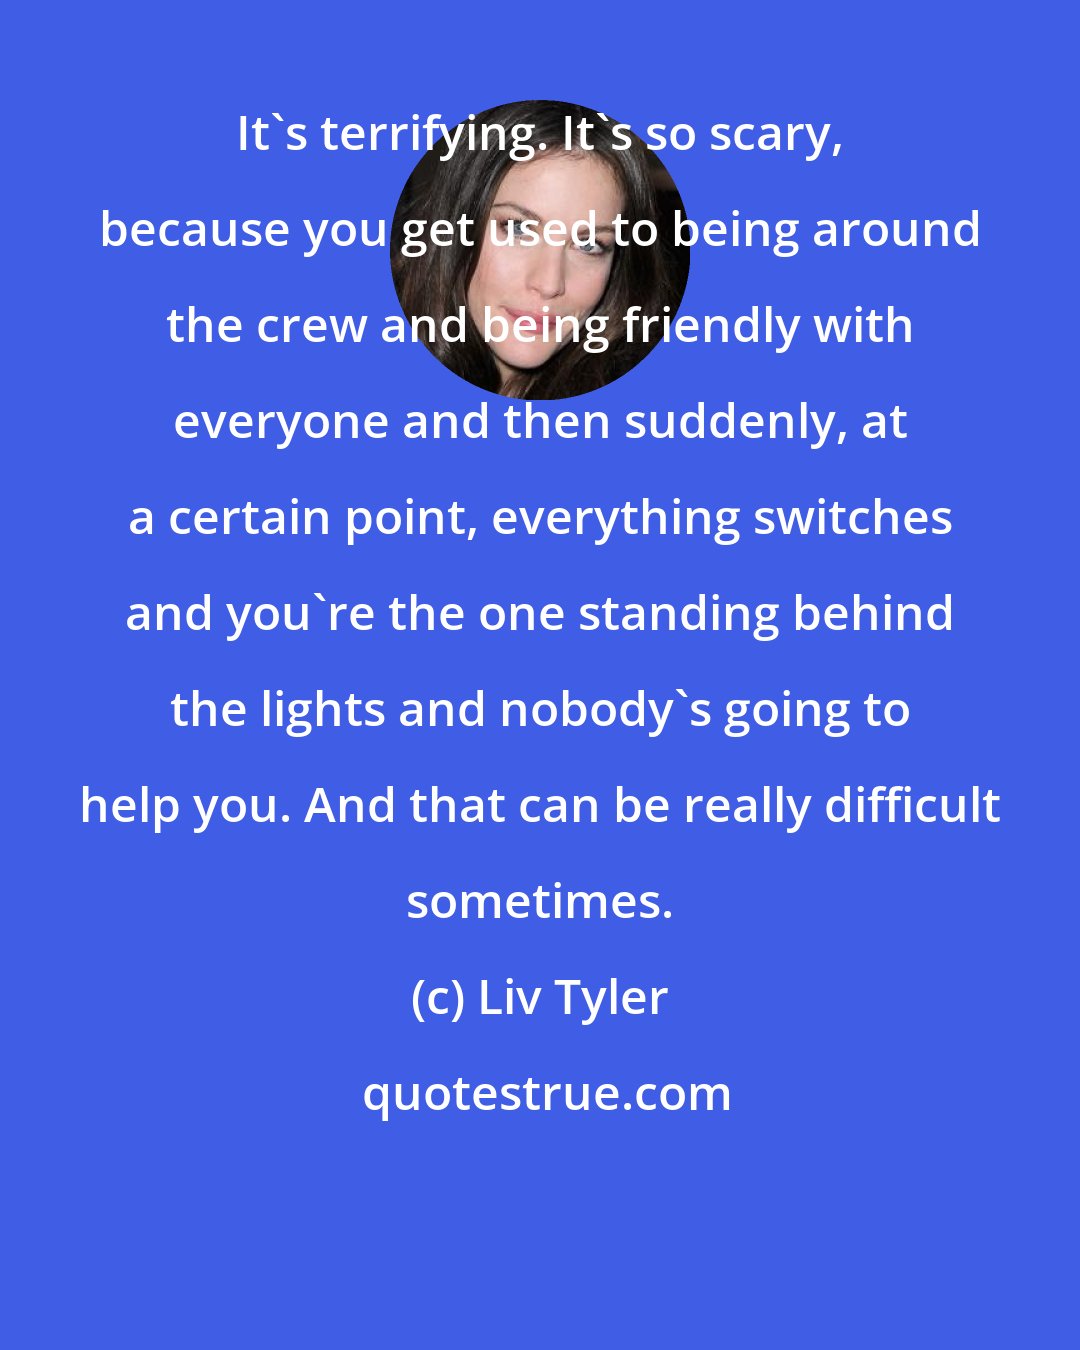 Liv Tyler: It's terrifying. It's so scary, because you get used to being around the crew and being friendly with everyone and then suddenly, at a certain point, everything switches and you're the one standing behind the lights and nobody's going to help you. And that can be really difficult sometimes.